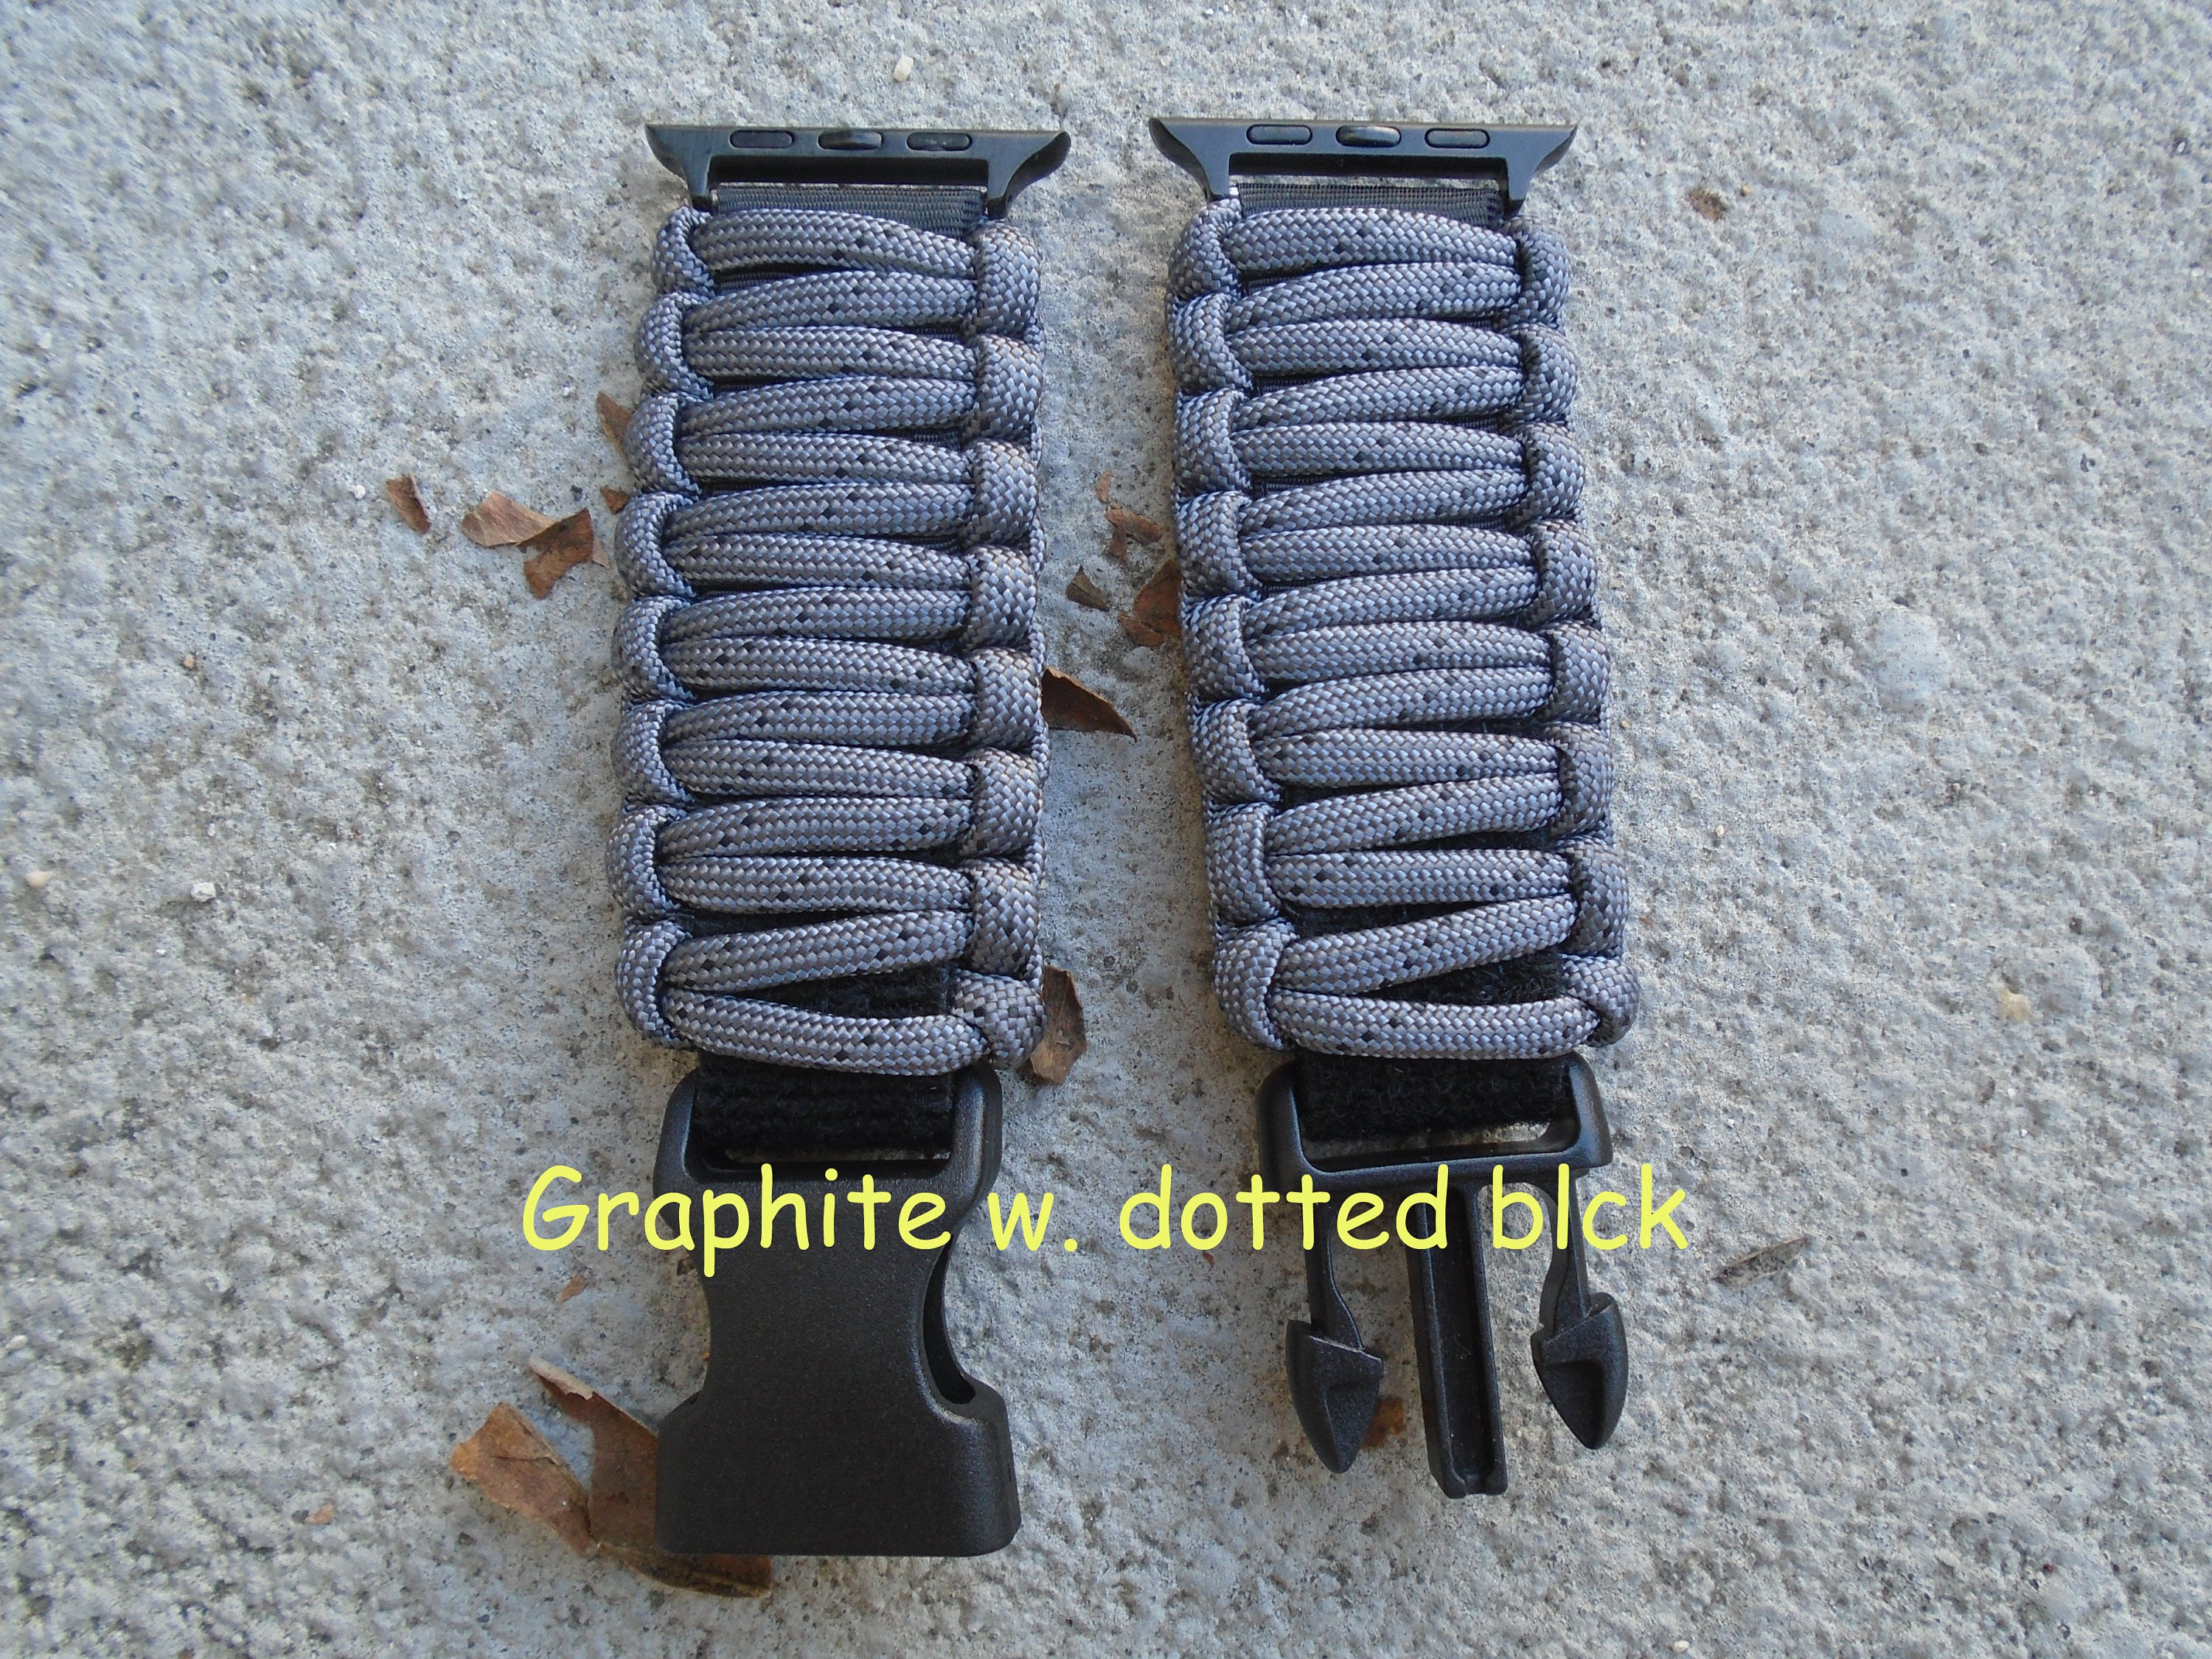 Paracord 550 Casio G-shock Adjustable Replacement Watchband W